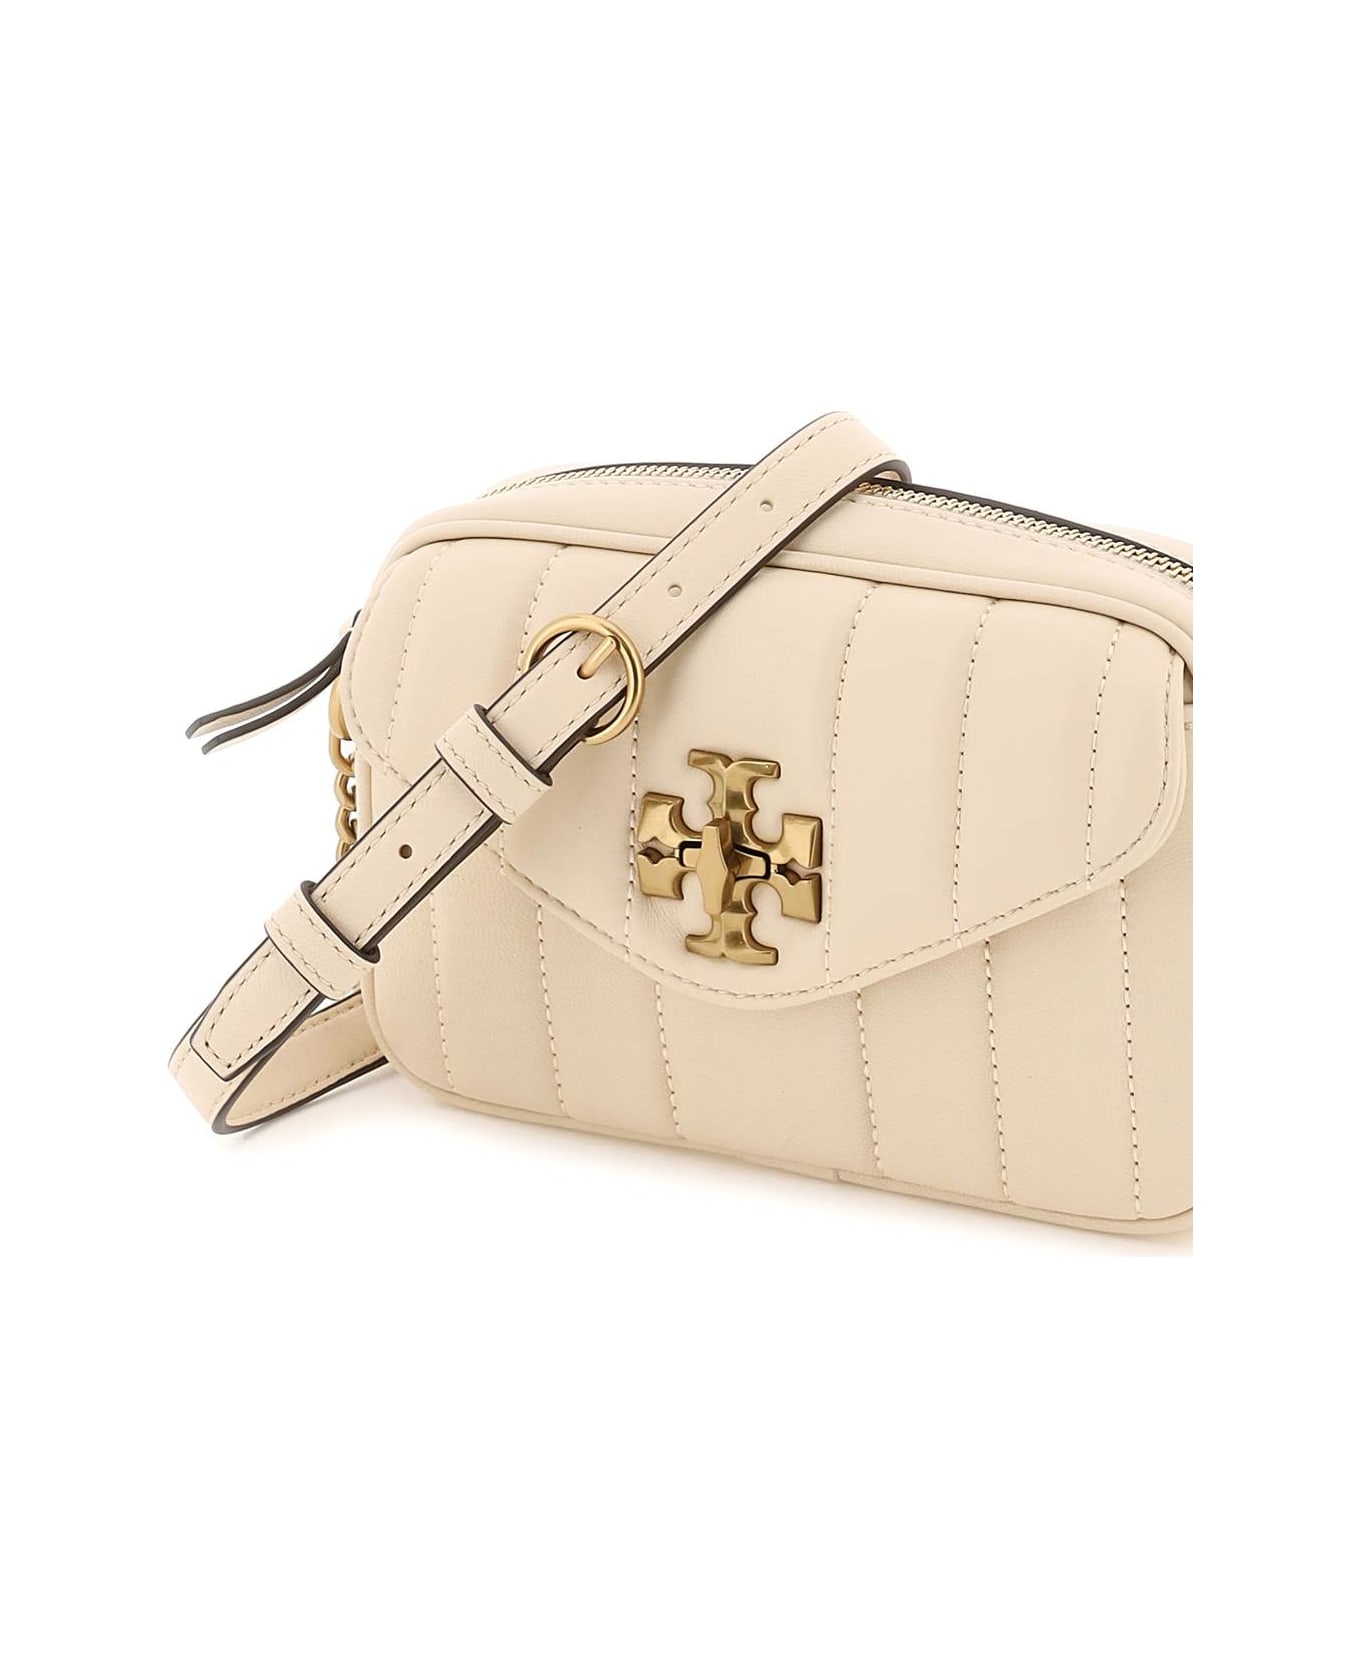 Tory Burch Mini Kira Quilted Leather Crossbody Camera Bag in Brie